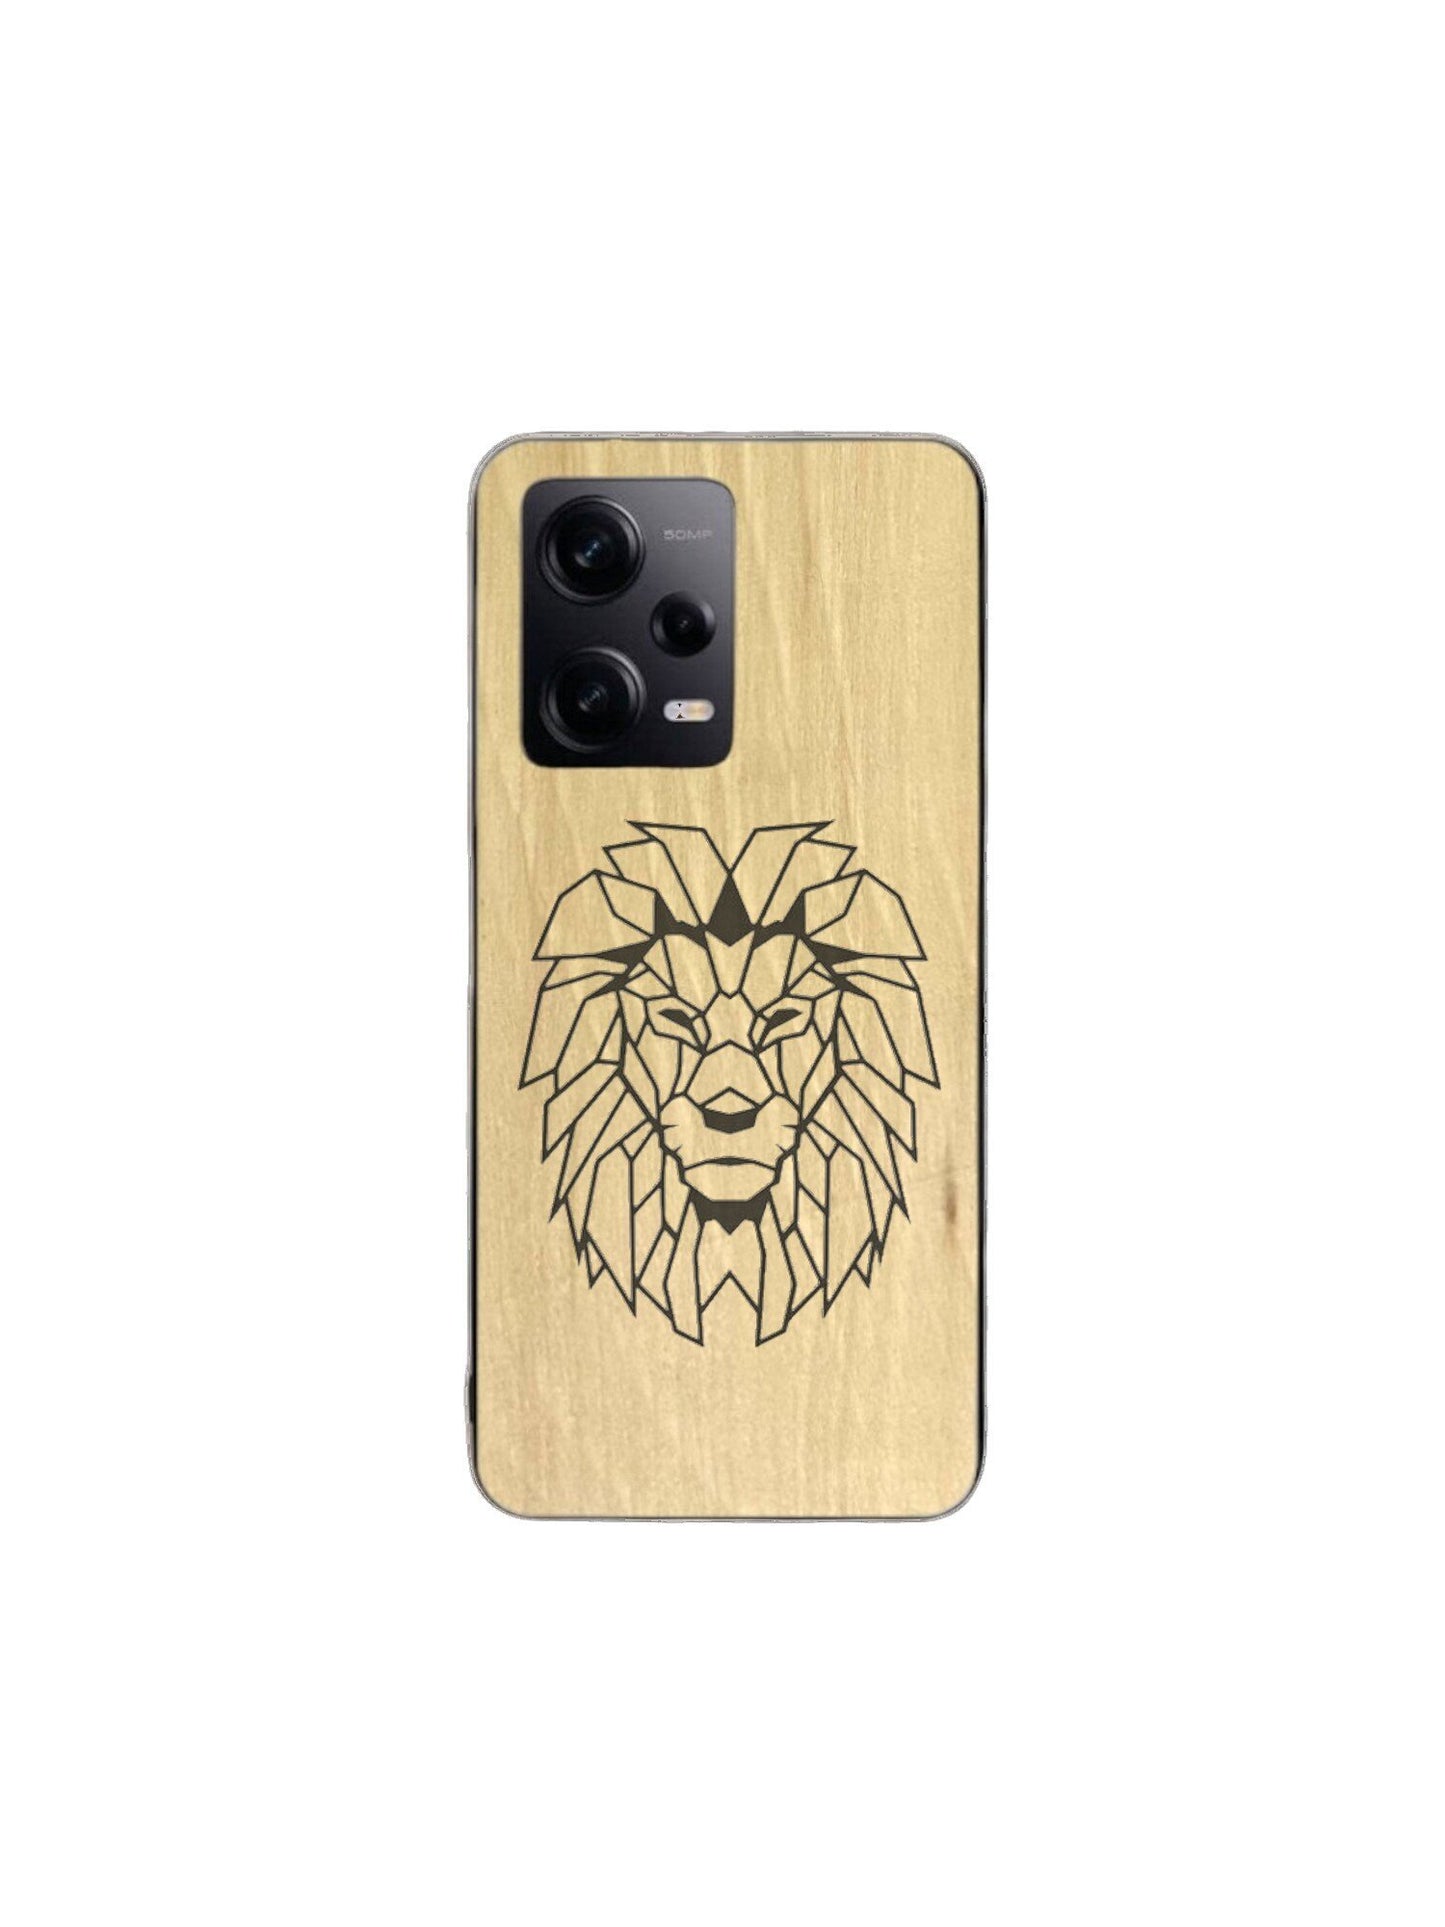 Oppo Find case - Lion engraving